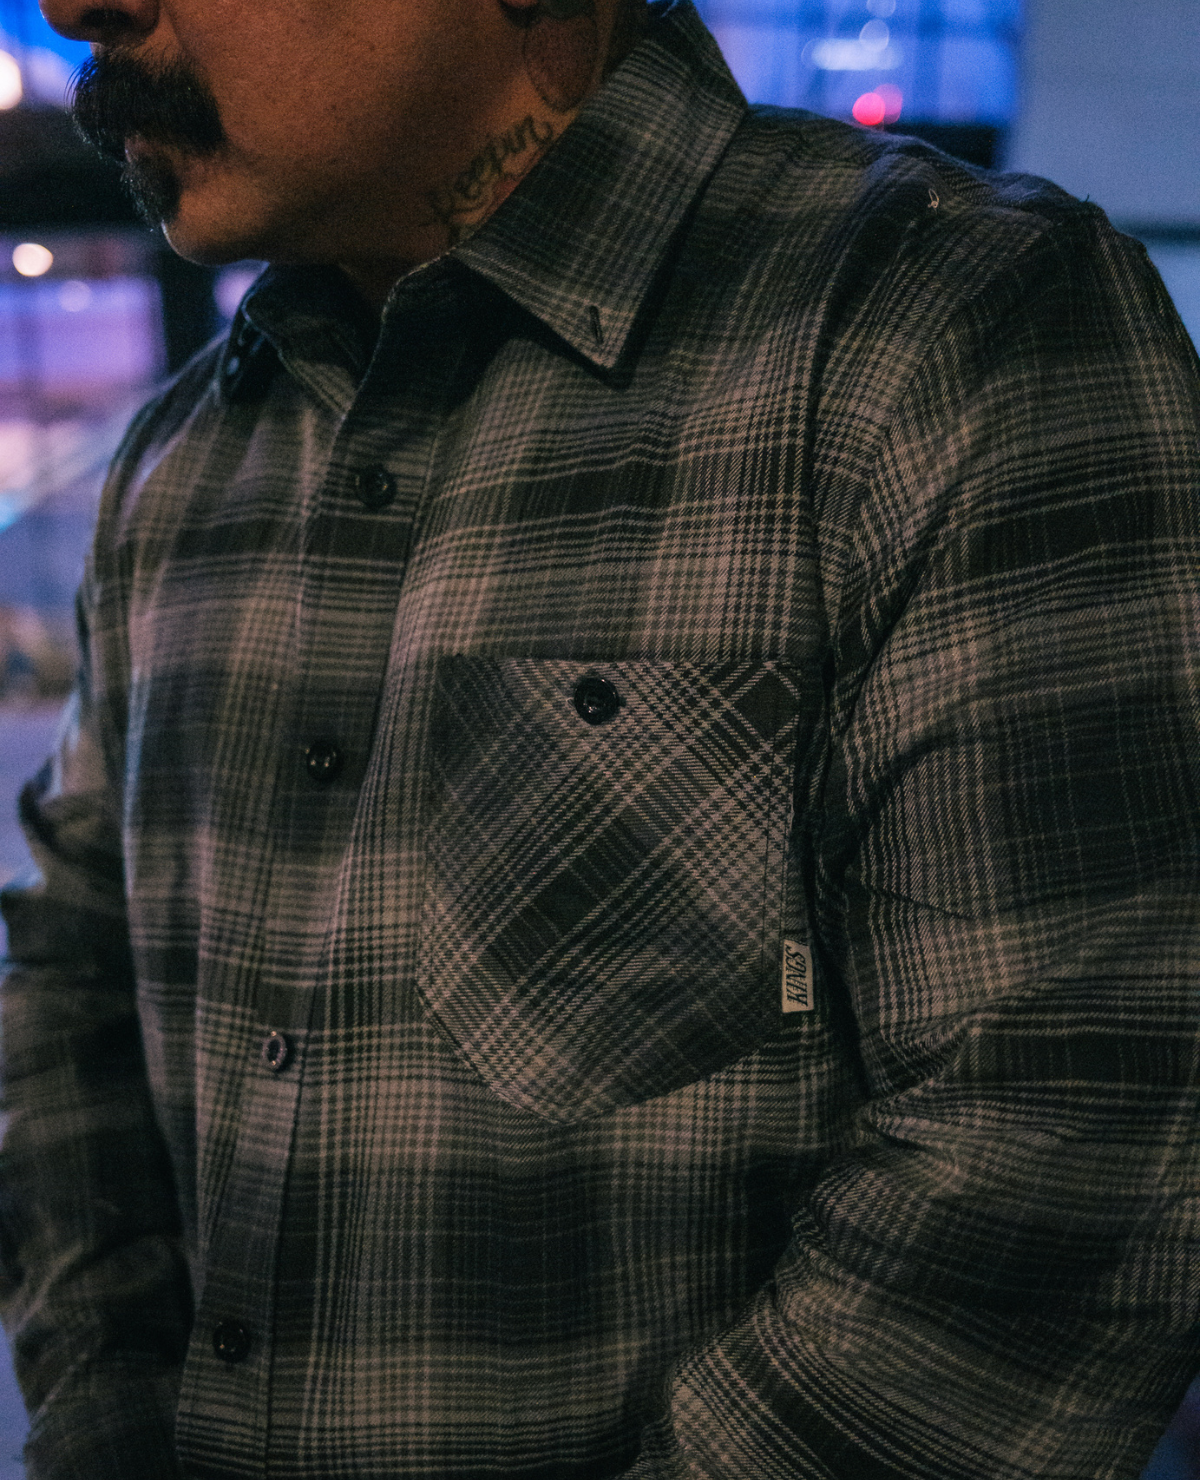 Delseyfly metoparis Hockey Clothing apparel company - partnership with the Los Angeles Kings NHL Team - Shop this limited edition flannel